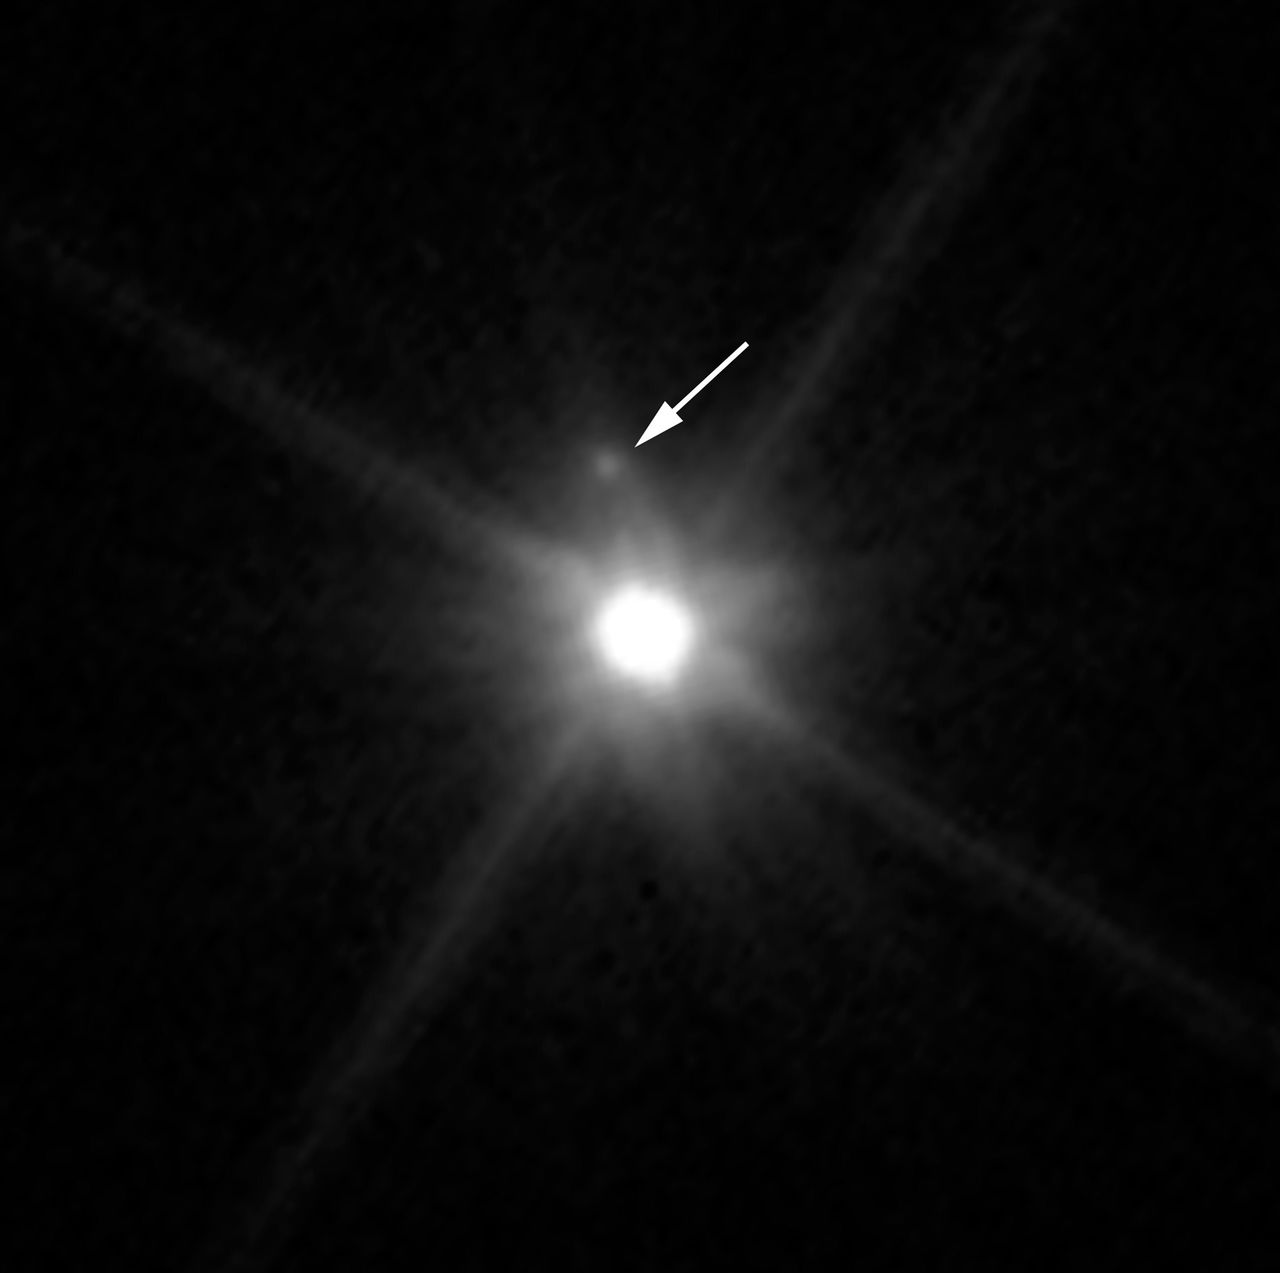 An undated photo made by NASA’s Hubble Space Telescope shows a small, dark moon orbiting Makemake, the second brightest icy dwarf planet, after Pluto, in the Kuiper Belt. This is the first discovery of a companion object to Makemake. The moon, provisionally designated S/2015 (136472) 1 and nicknamed MK 2, is more than 1,300 times fainter than Makemake.